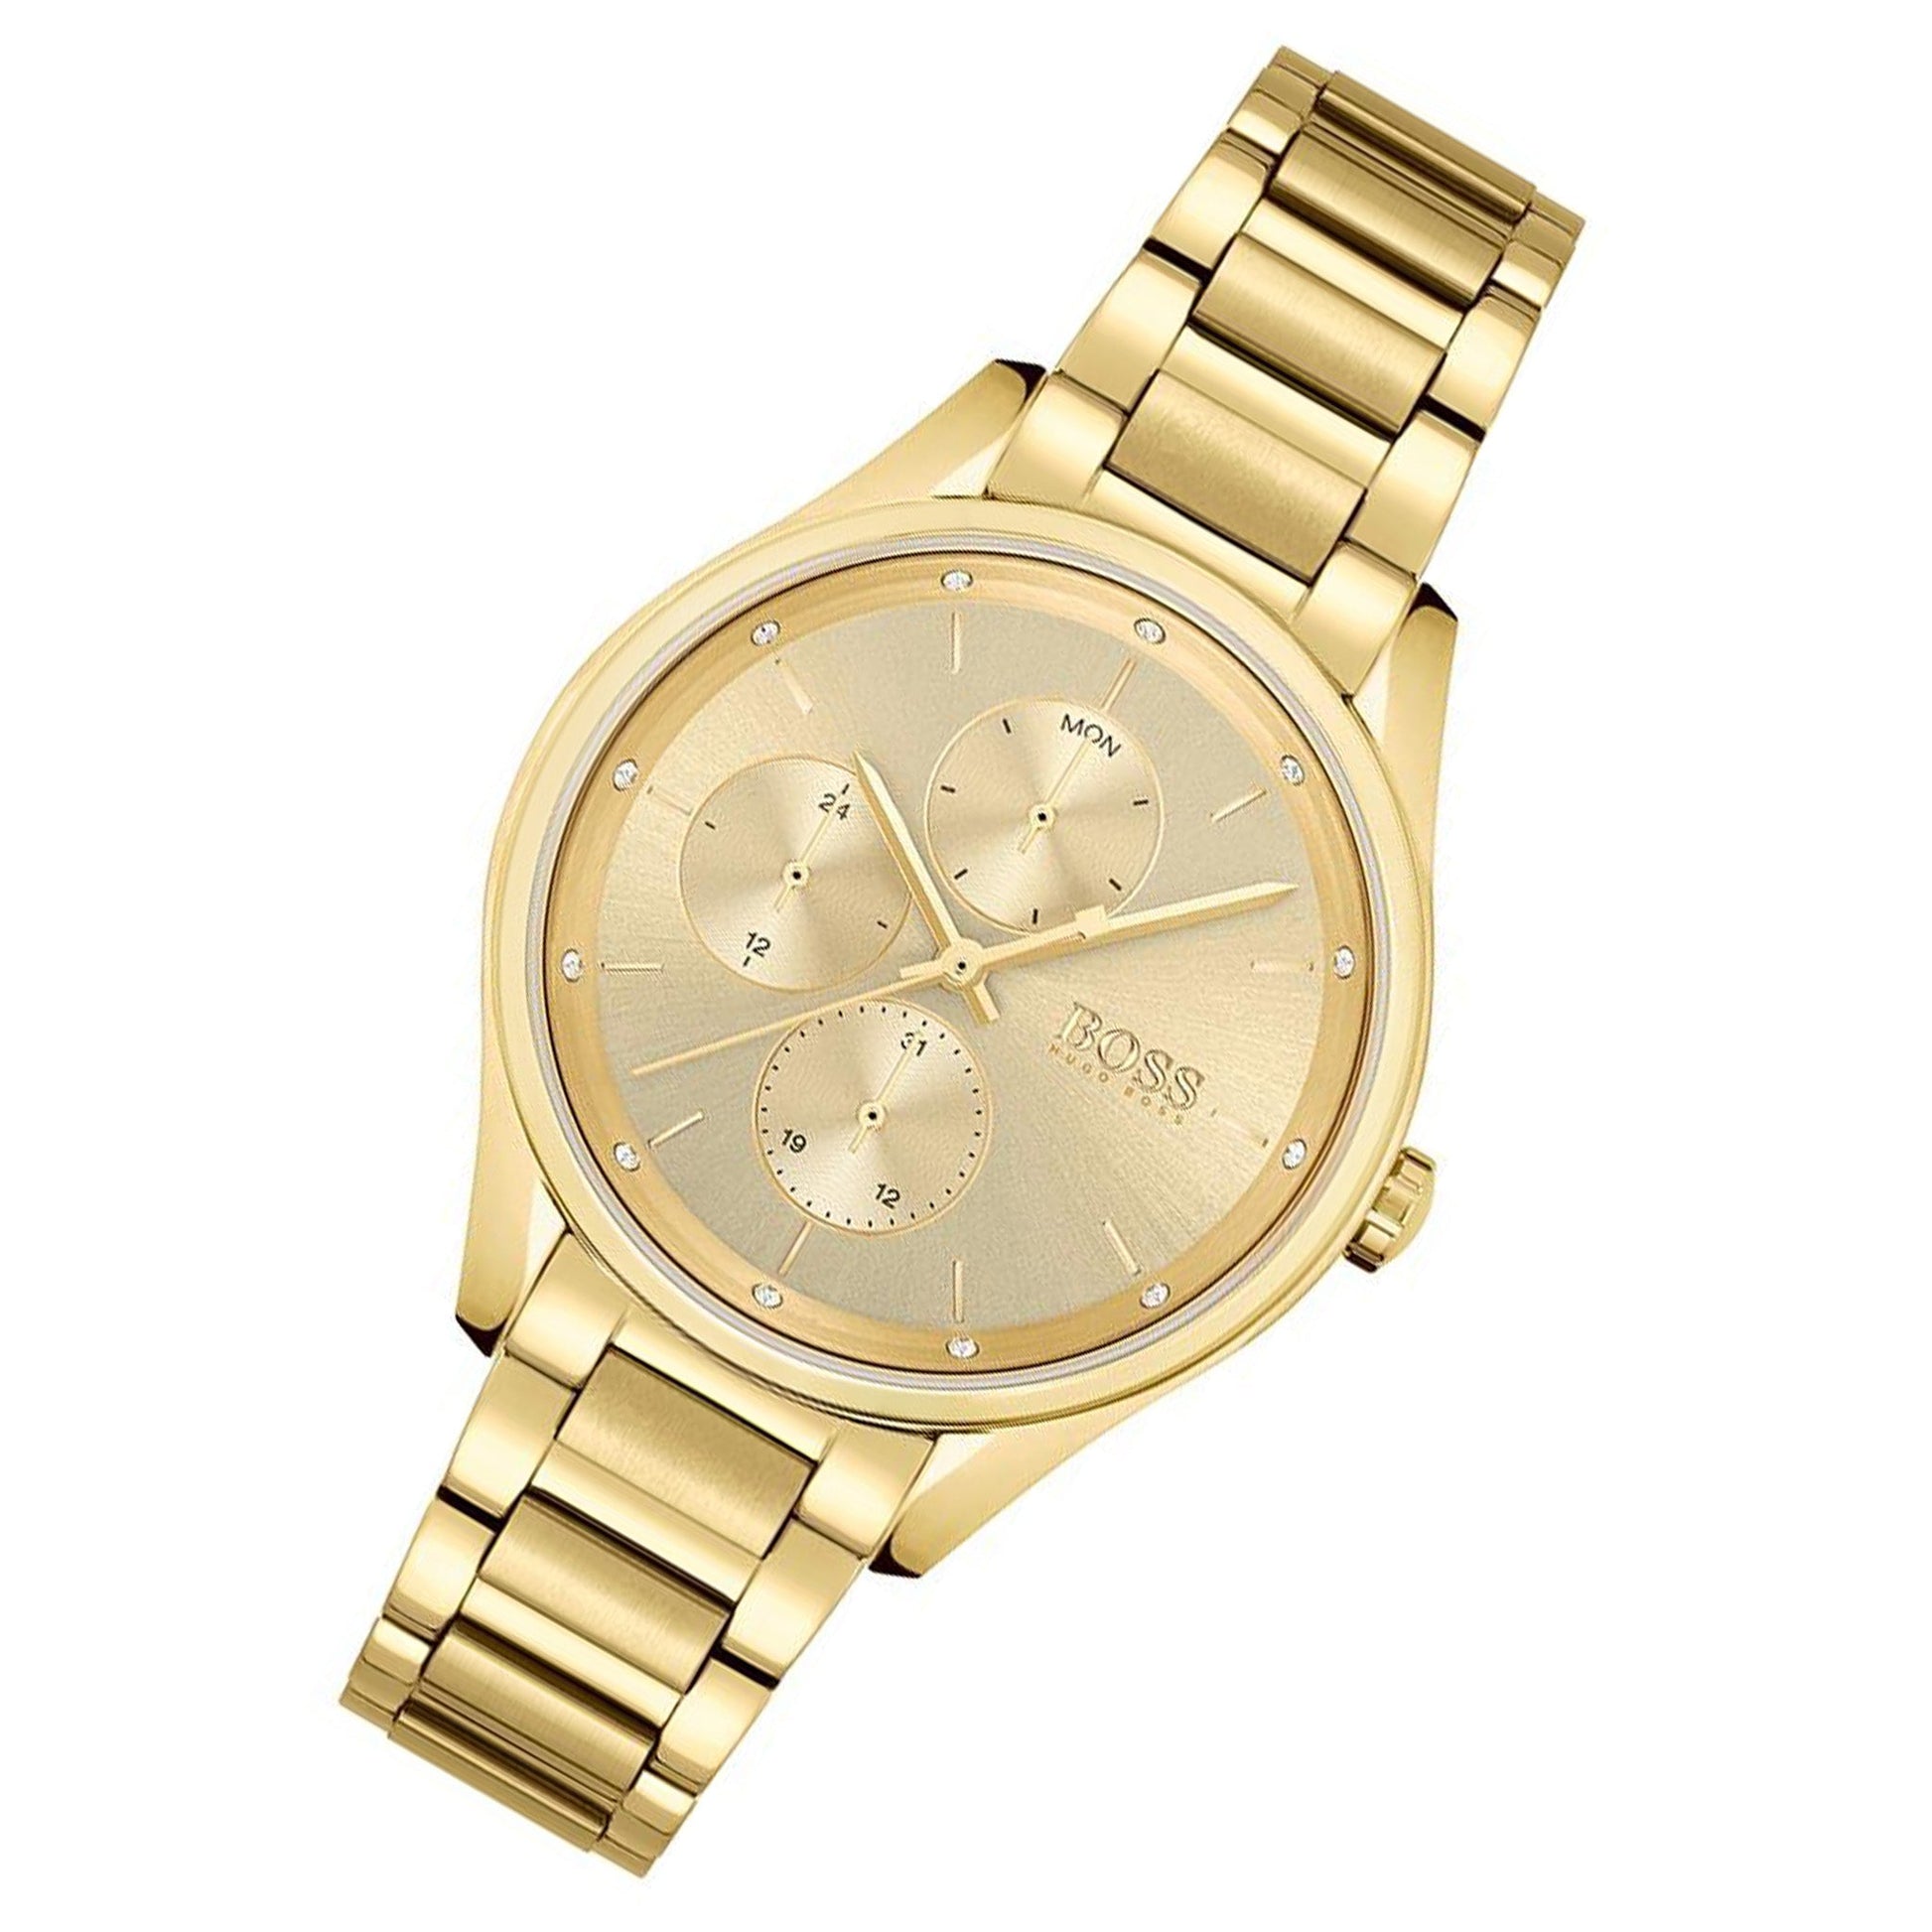 Hugo Boss Grand Course Gold Dial Gold Steel Strap Watch for Women - 1502584